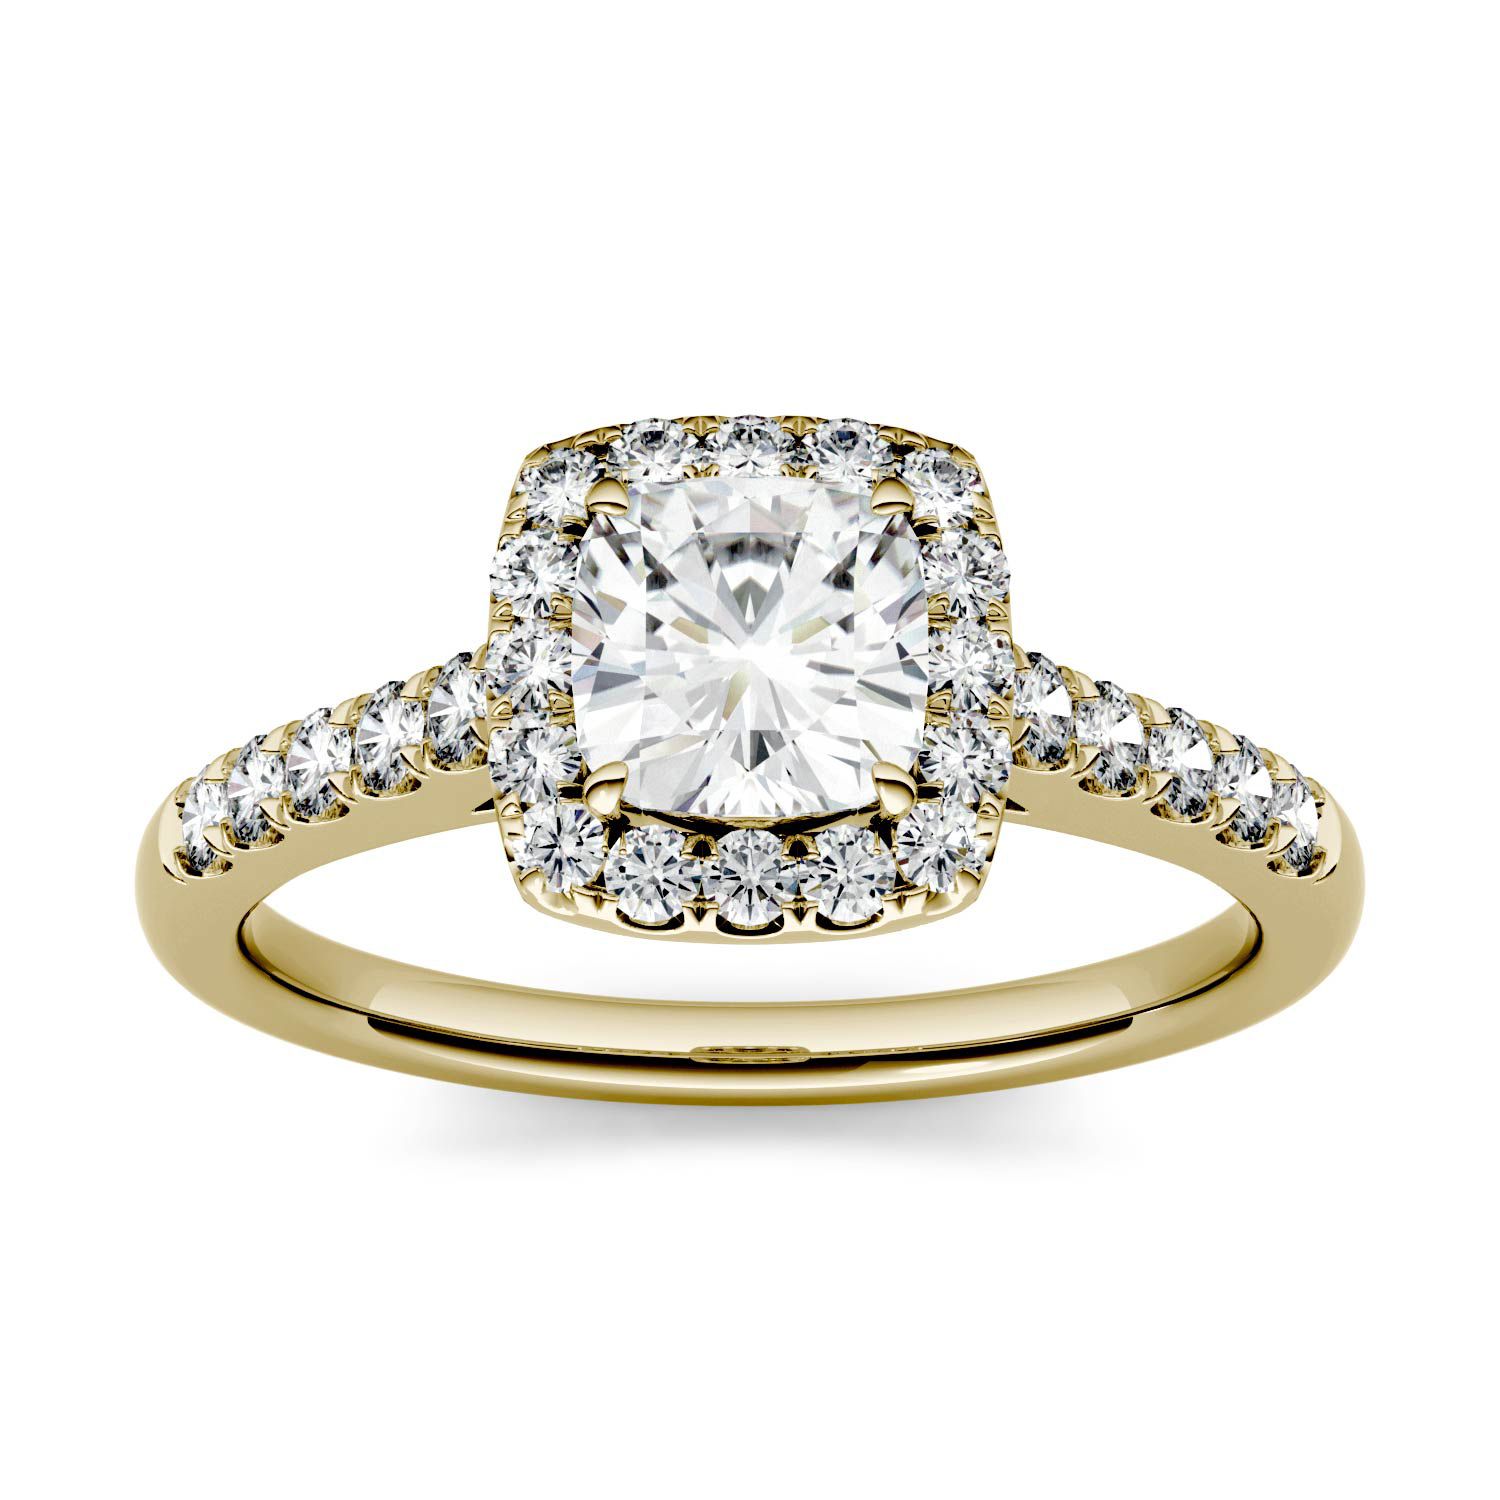 CHARLES & COLVARD: Cushion Moissainte Halo With Side Accents Engagement Ring